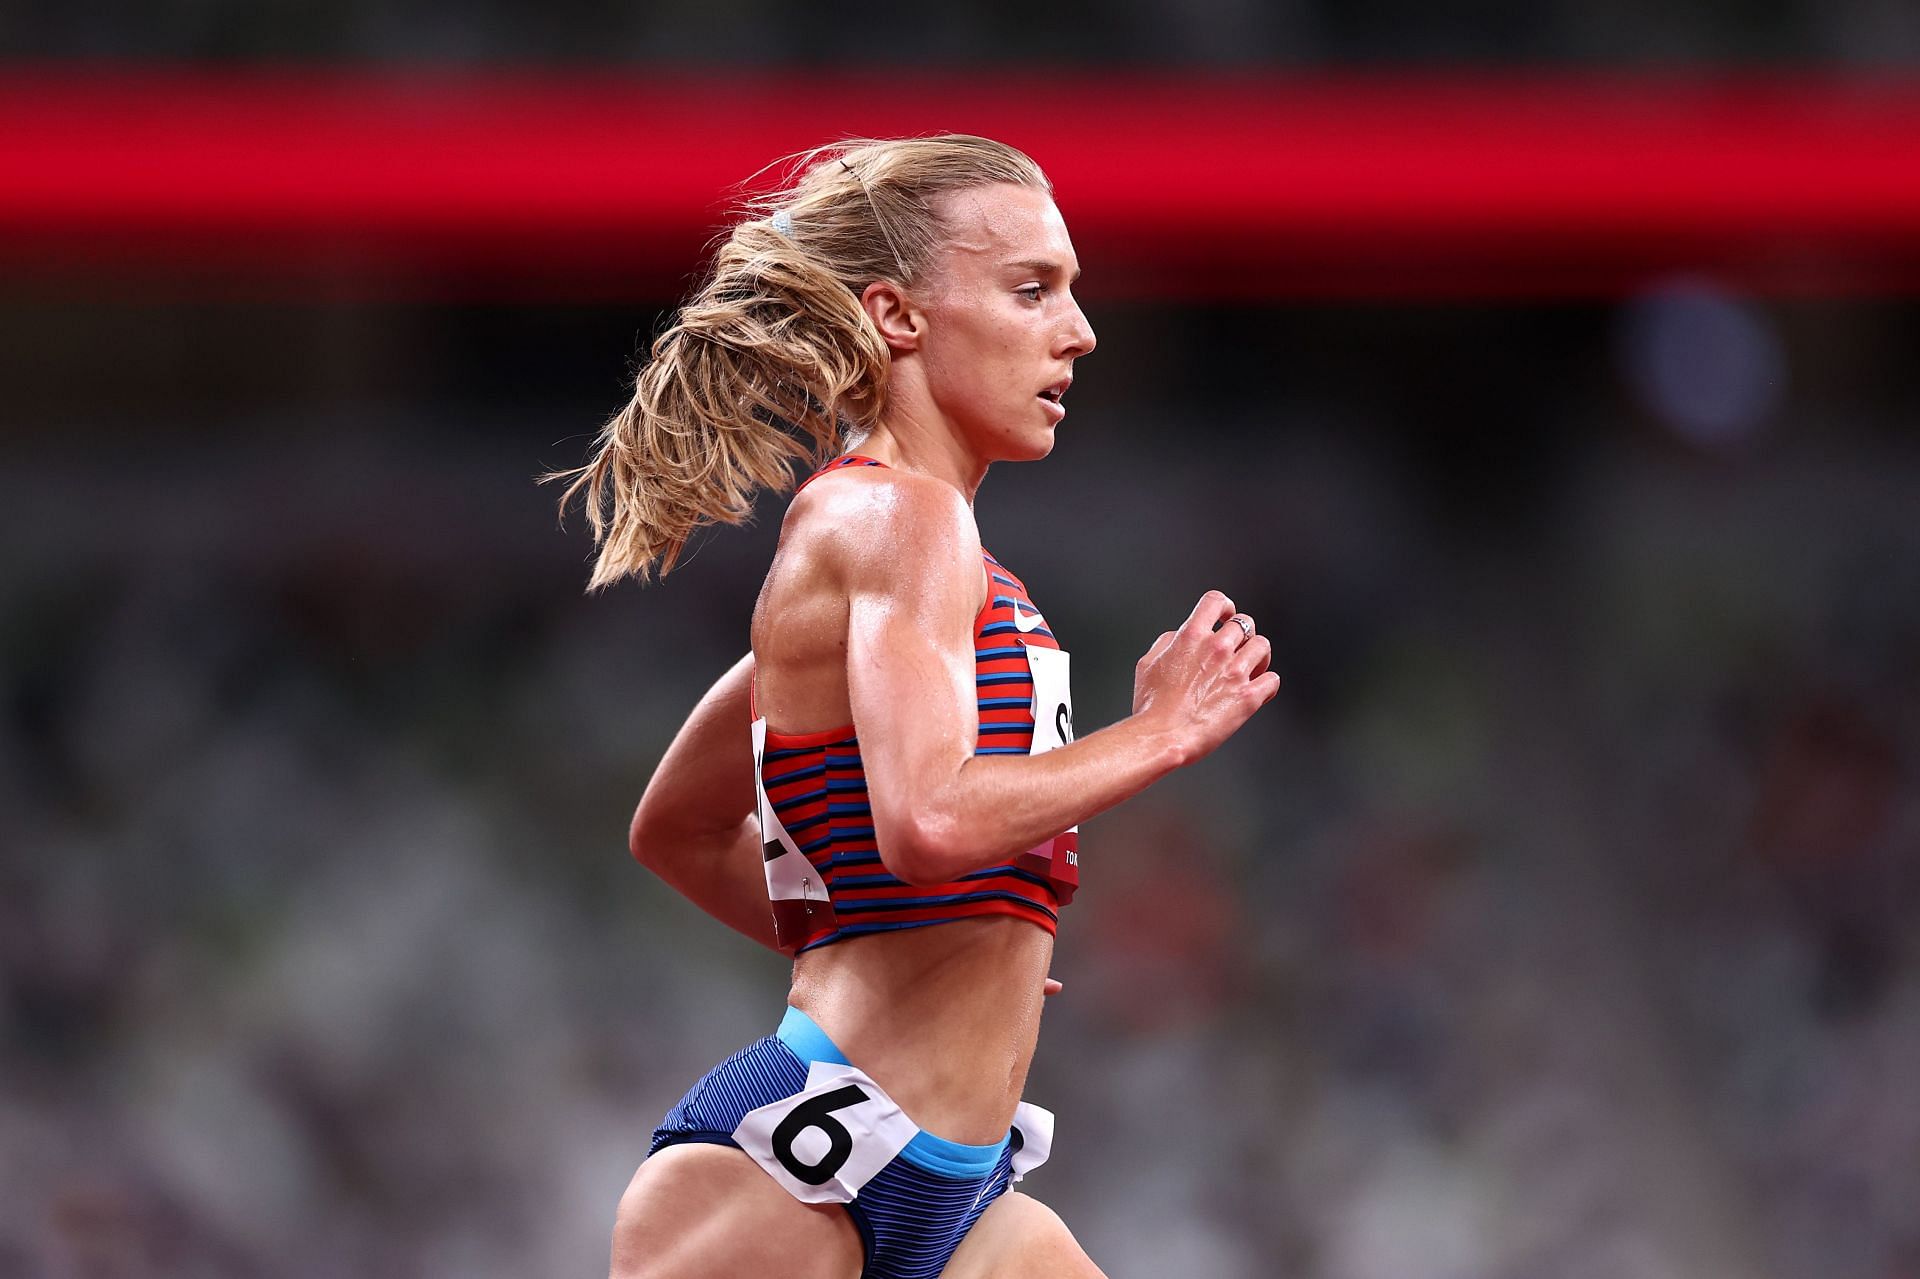 Who is Emily Sisson? Marathon runner makes new American record at